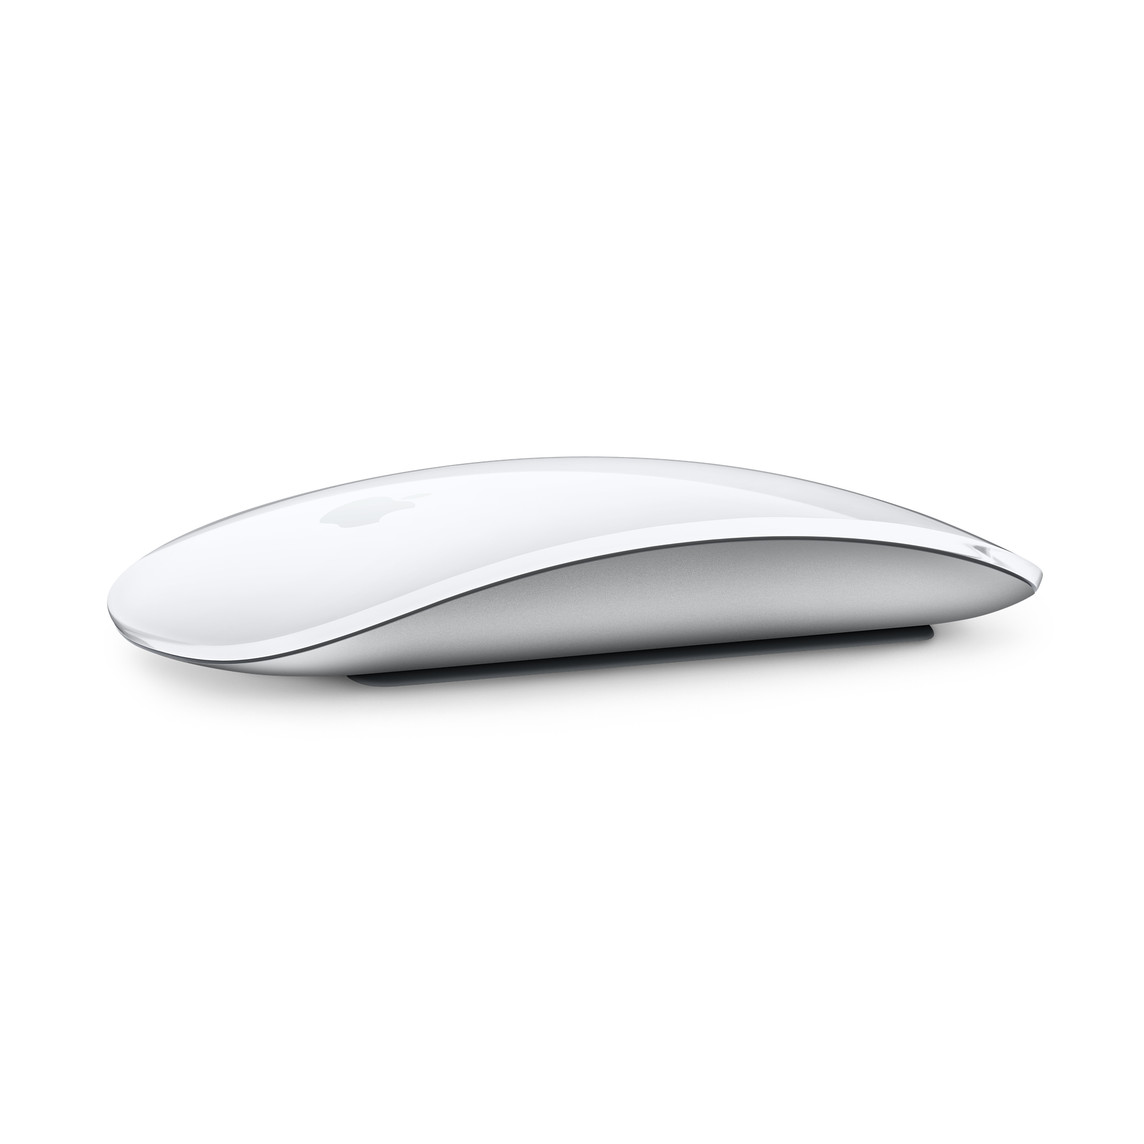 "Apple Magic Mouse 3 - Sleek, white wireless mouse with smooth contours and minimalistic design, designed for seamless integration with Apple devices. Features advanced gesture controls and long battery life for enhanced productivity. Compatible with Mac, iPad, and iPhone. Perfect for work, gaming, and everyday use."